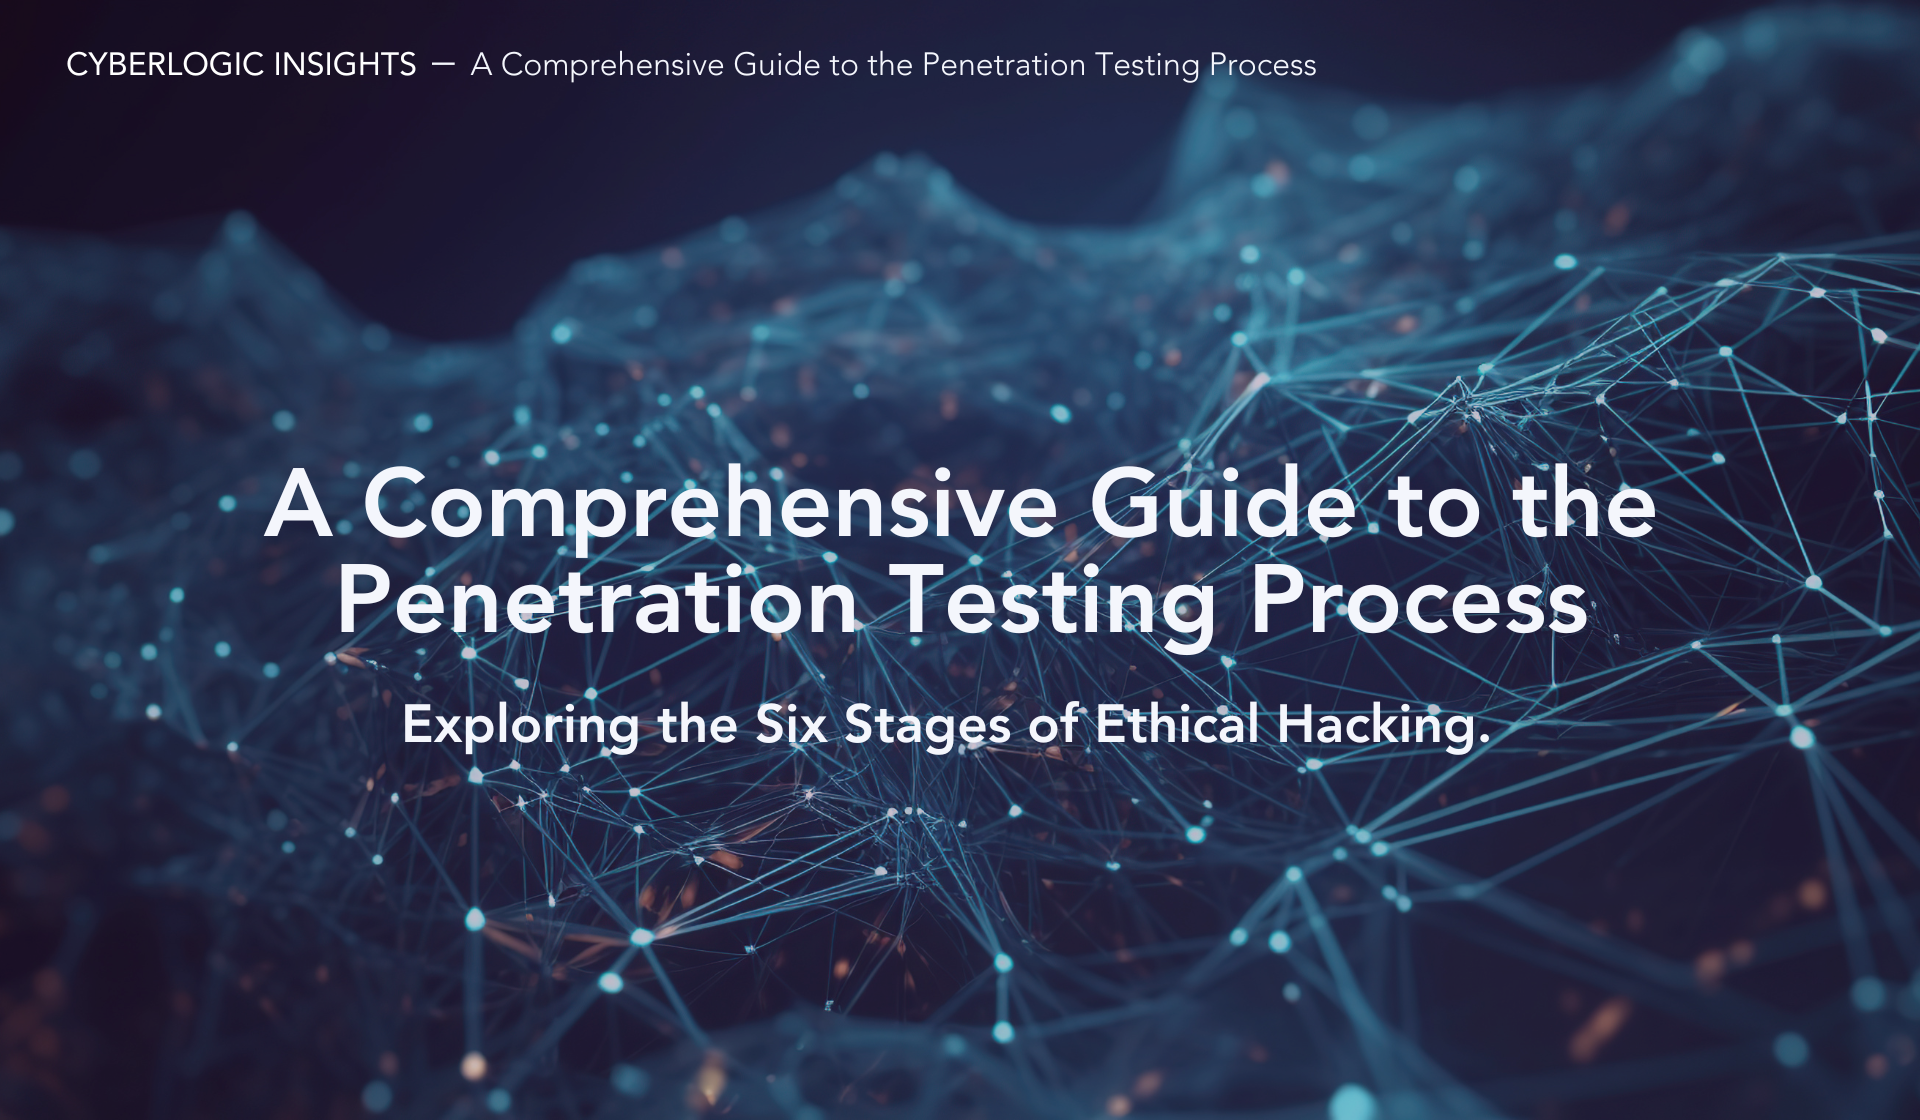 A Comprehensive Guide to the Penetration Testing Process